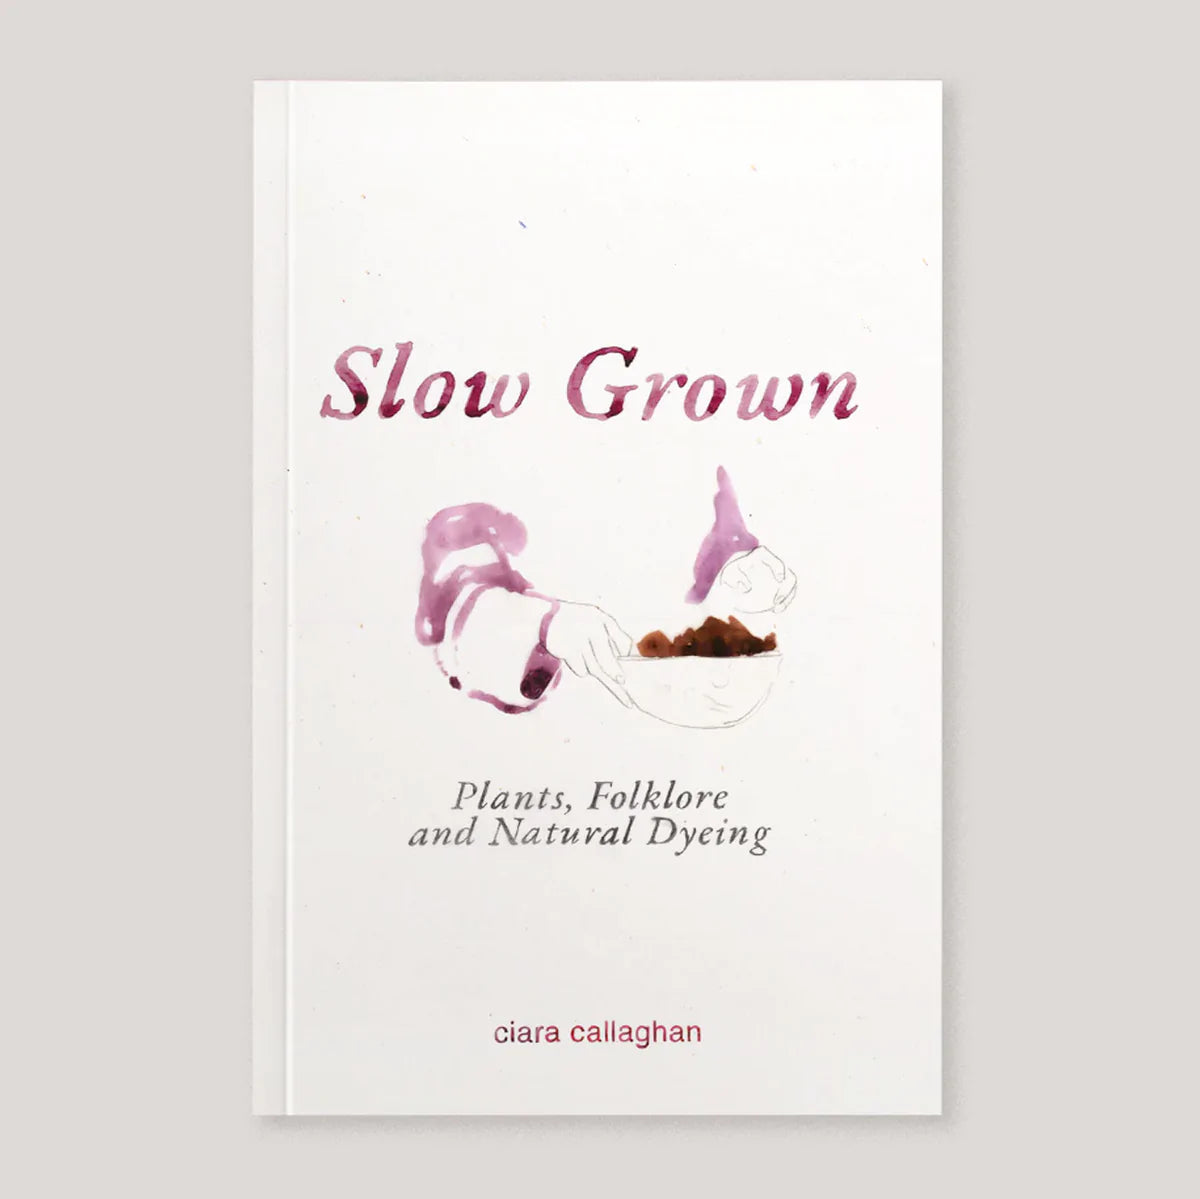 Slow Grown - Plants, Folklore and Natural Dyeing